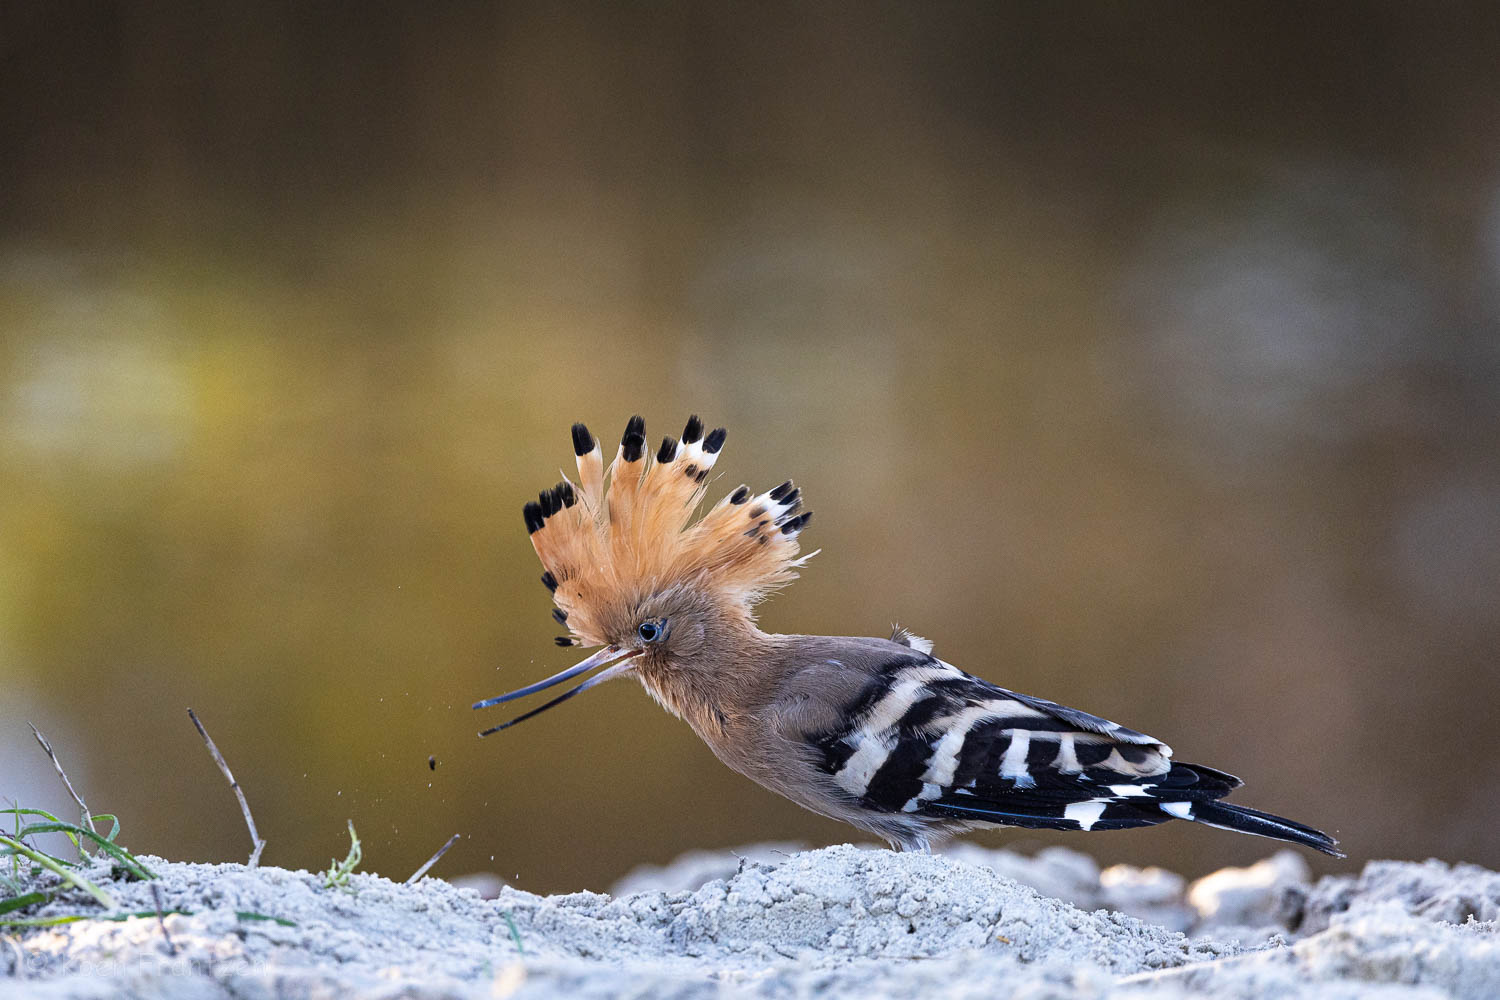 Hoopoe searching for food...